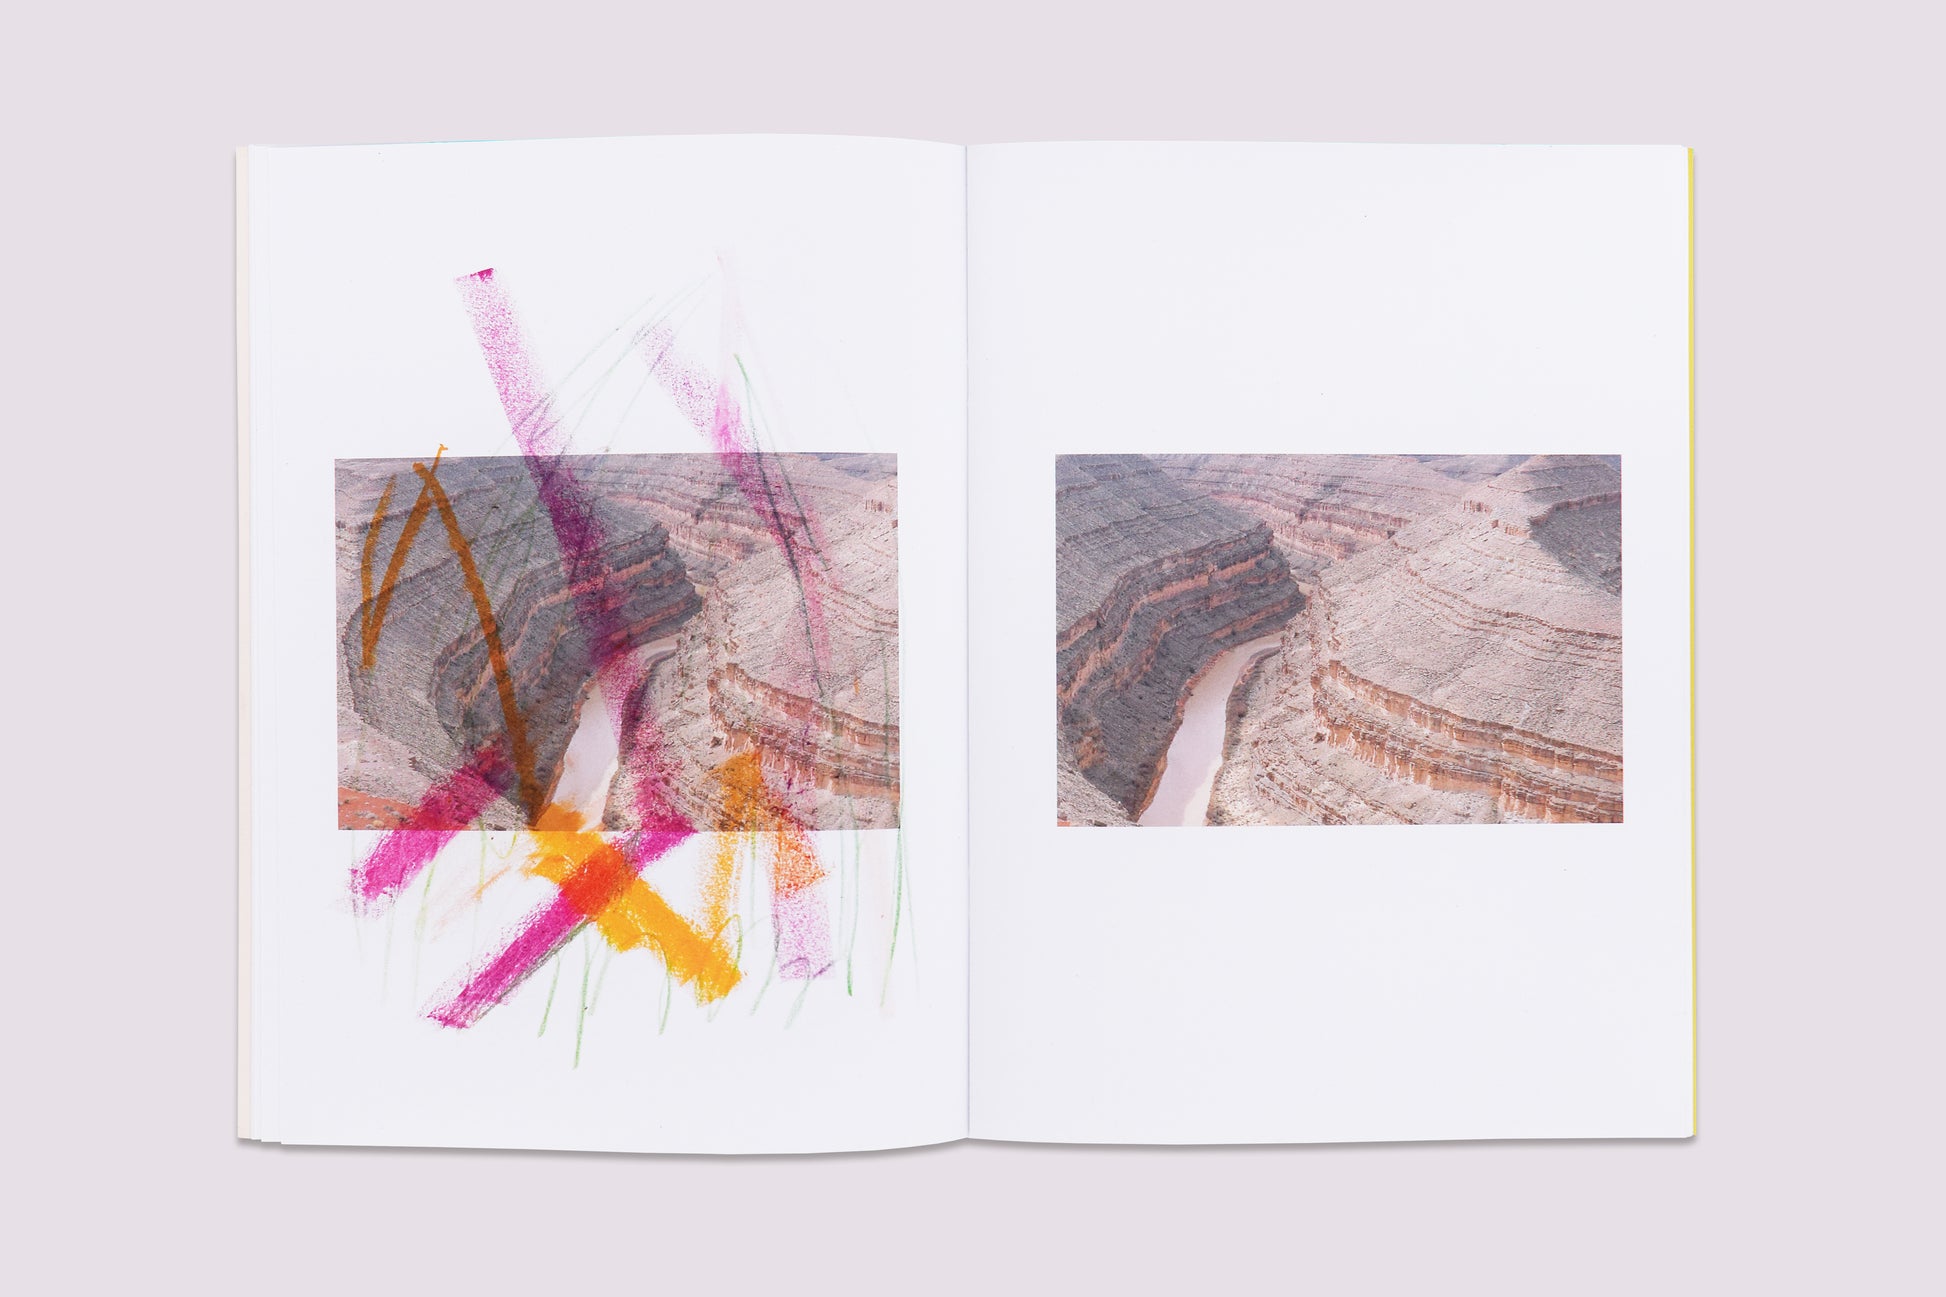 Ambient Park/Félicia Atkinson published by Perimeter Editions